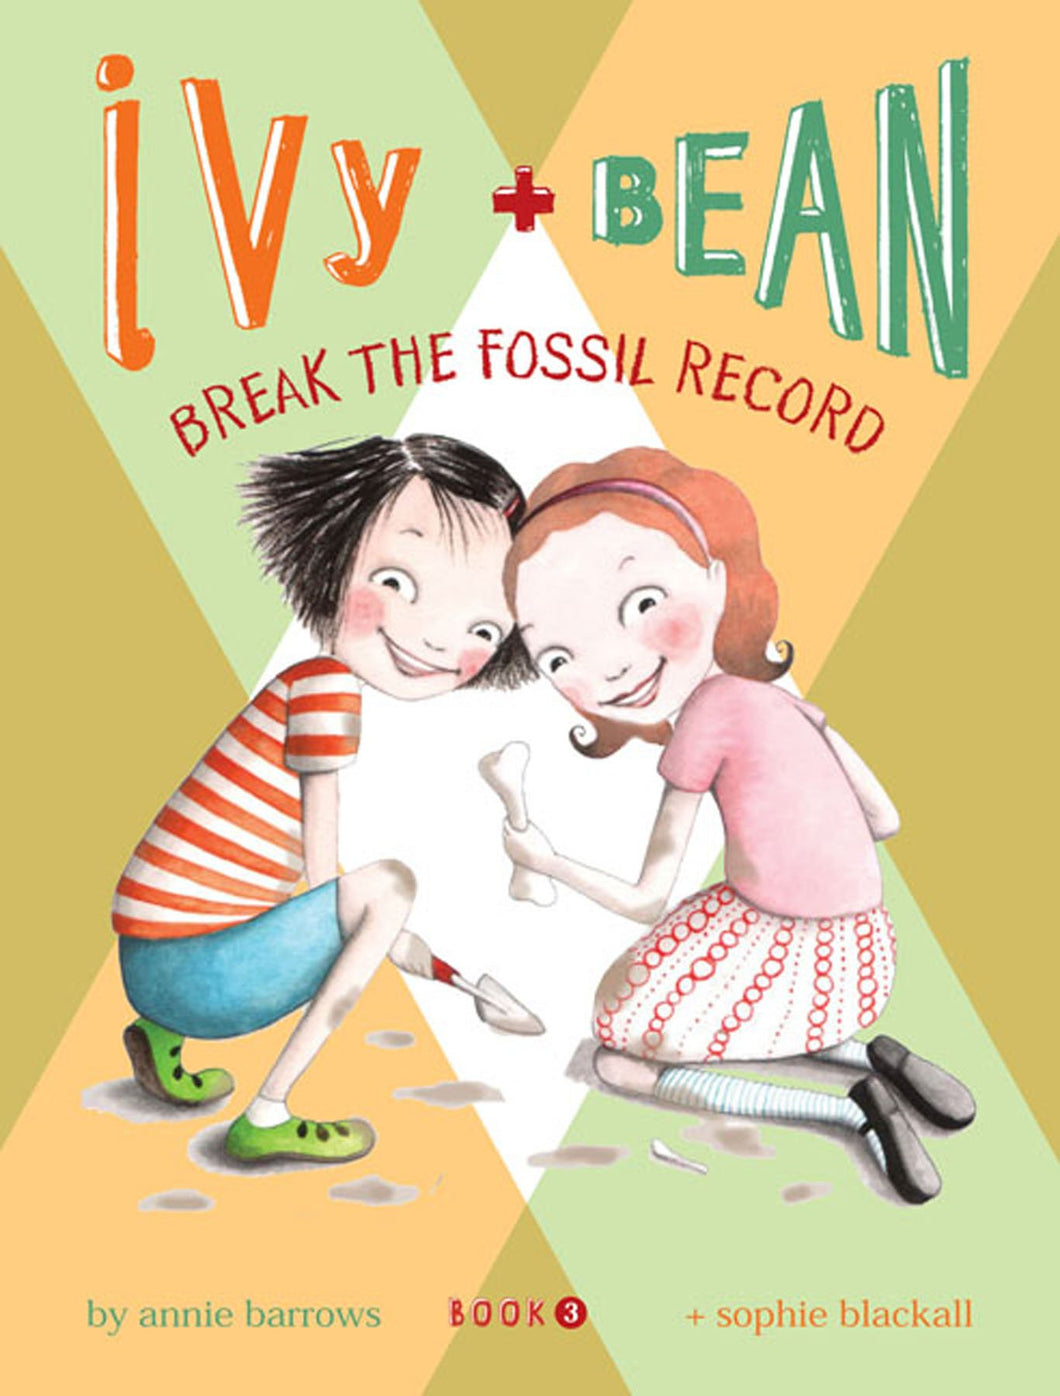 Ivy + Bean Break the Fossil Record (Book 3)